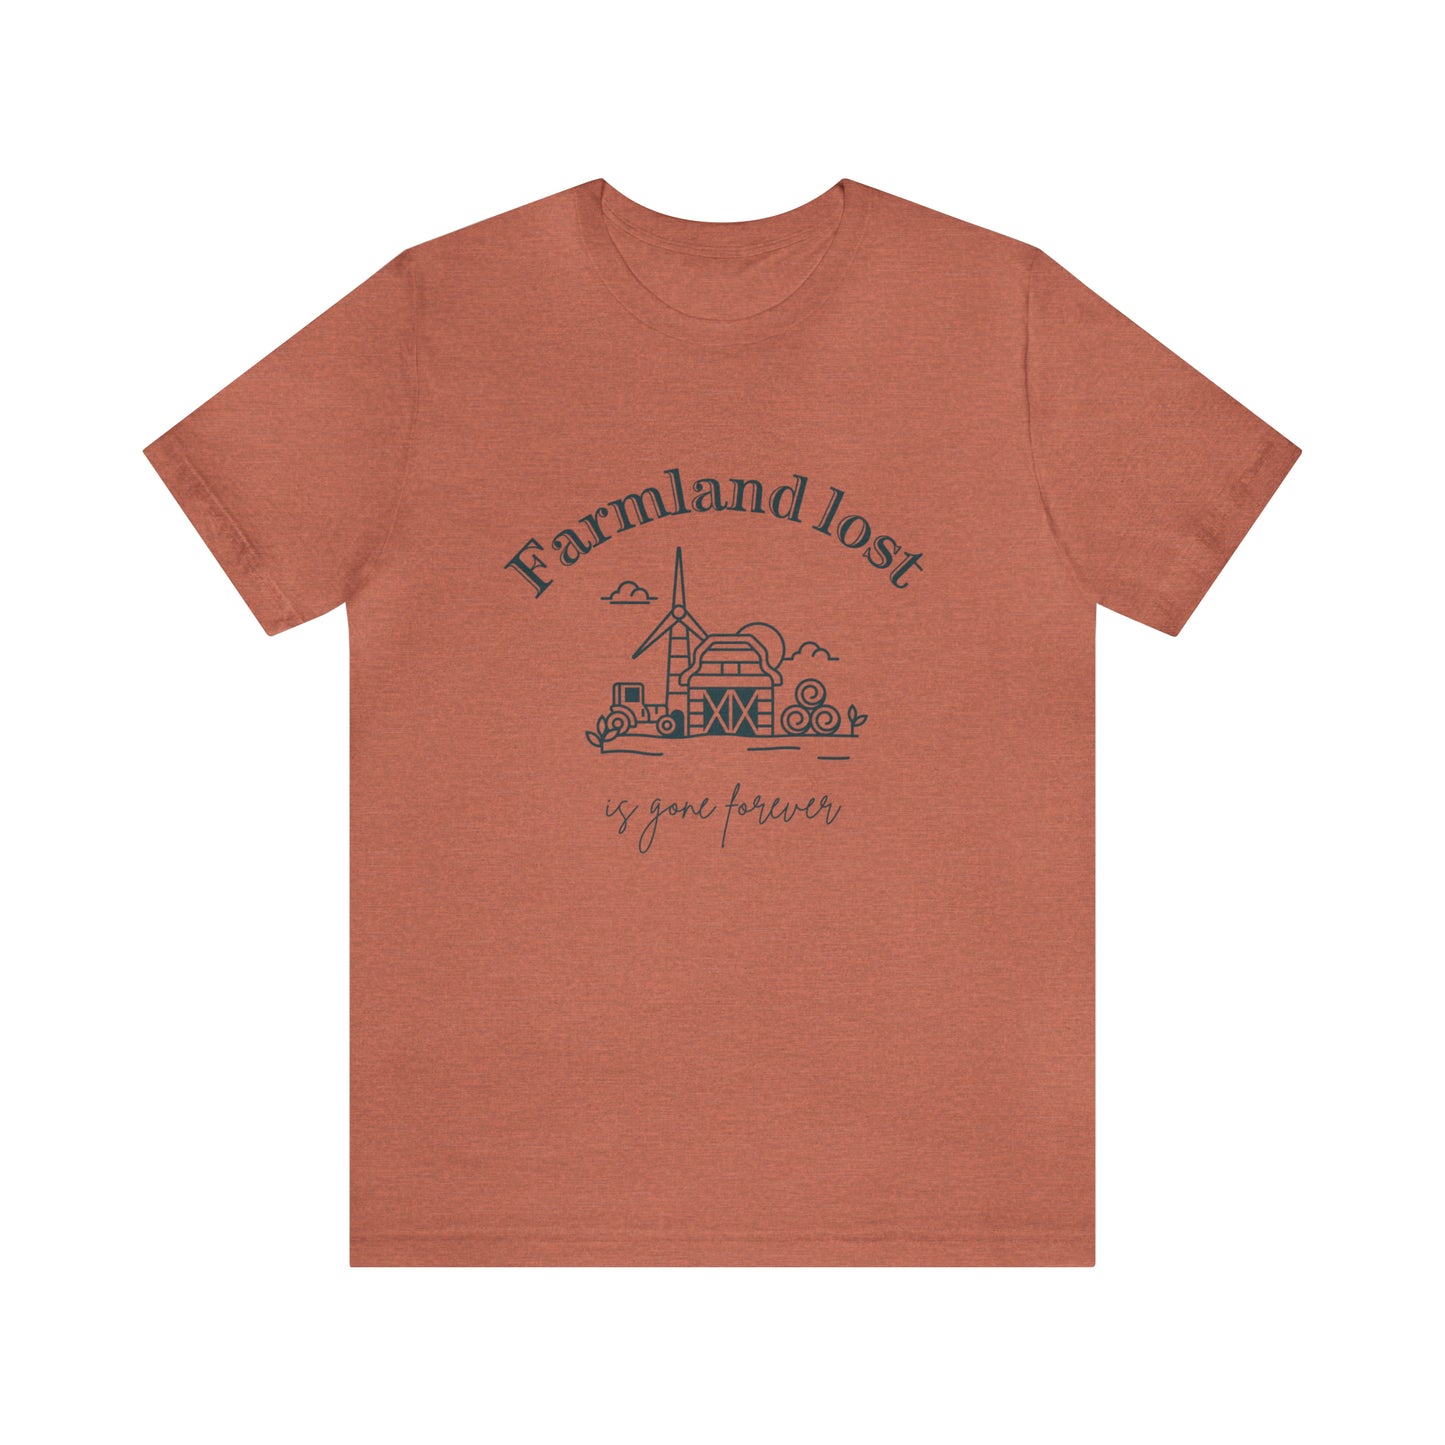 Farmland lost is gone forever no megasite Short Sleeve Unisex Adult Tee